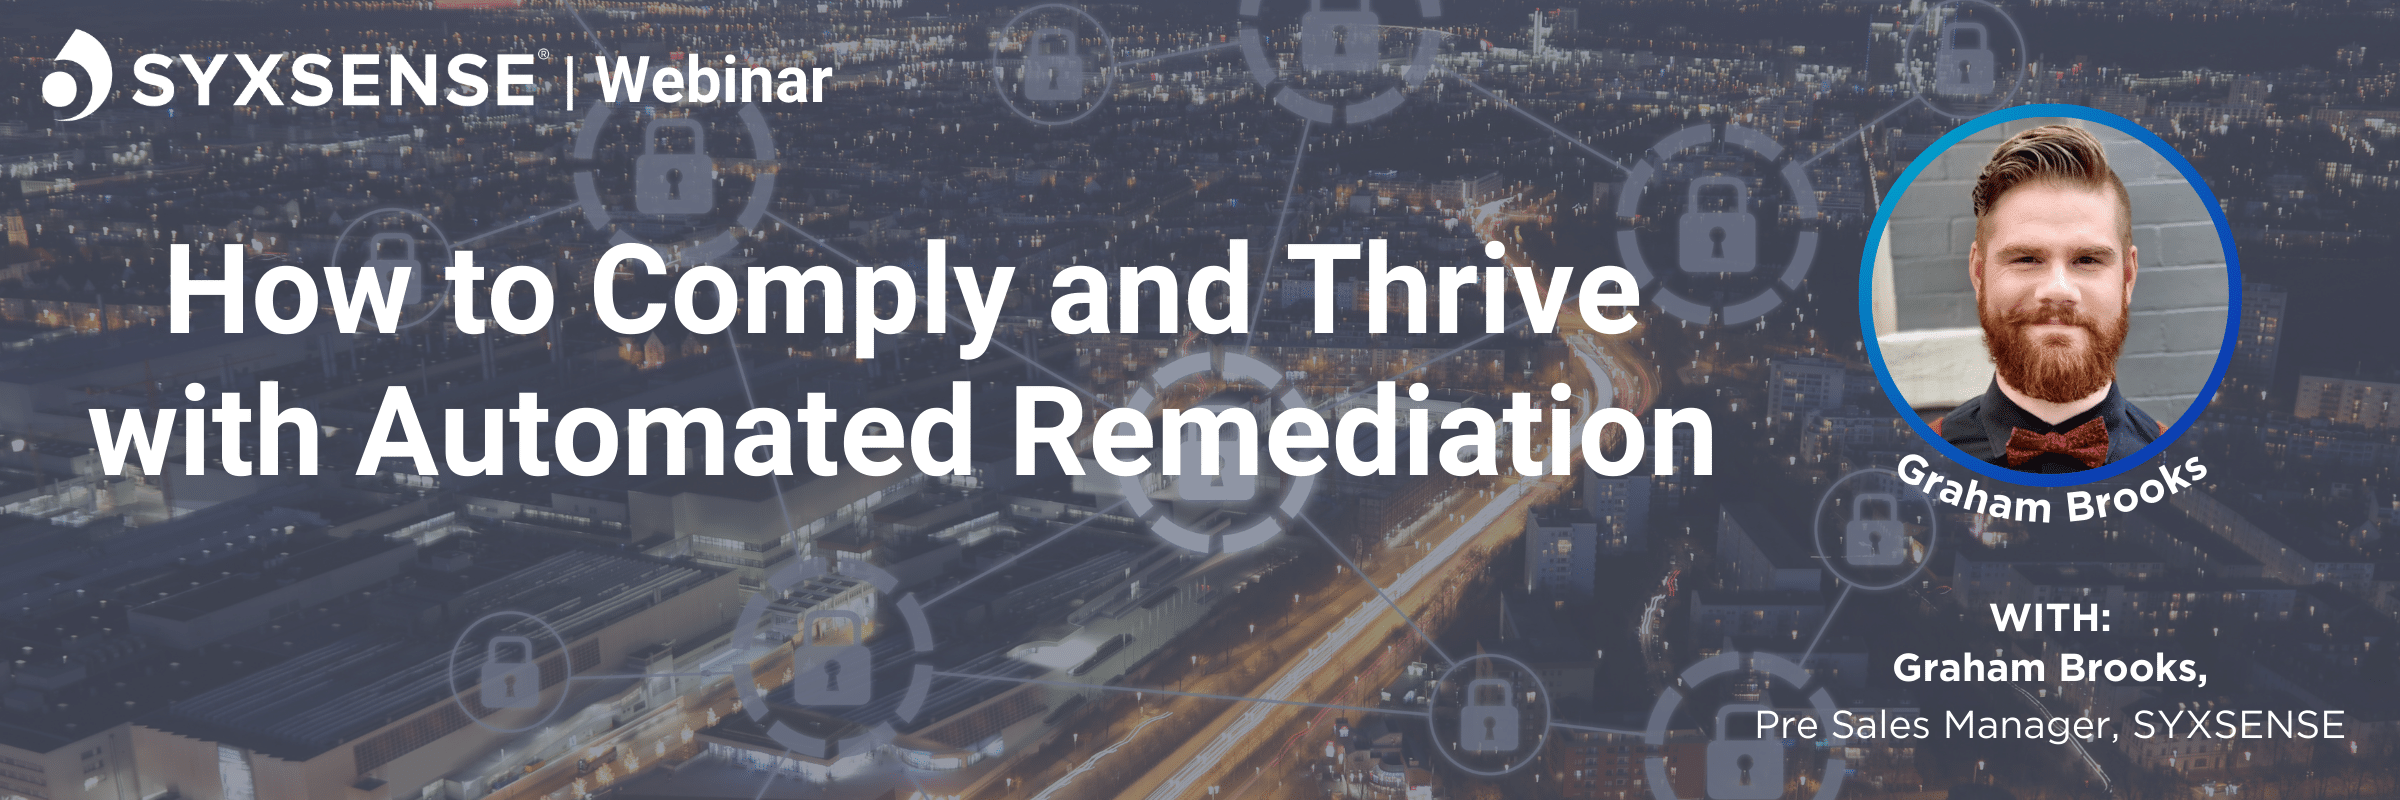 Webinar: How MSPs/MSSPs Can Comply and Thrive with Automated Remediation